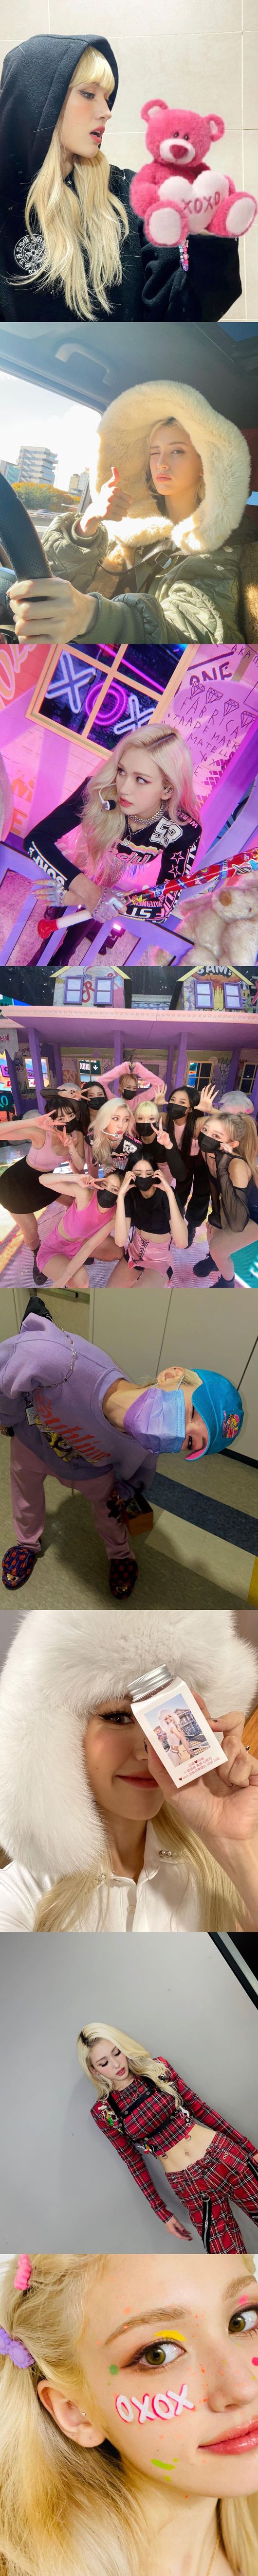 Singer Jeon So-mi has released photos of her exo activities.On the 26th, former Somi wrote to her instagram, Thank you for loving Exo Exo, a collection of Exo Exo activities. # Activity is over, but is it not over?I posted several photos with the message .The photos are various images taken during the album activities. The beauty and dry body of the former Sommy like Barbie doll attracts attention.In particular, the three lovely figures taken with TWICE members Nayeon and Chae Young are enough to catch the attention of fans.On the other hand, Jeon Sommy released his first full-length album XOXO and is working on the same title song XOXO.On the 20th, the first reality IM Sommy: XOXO was released.ex-sommy instagram